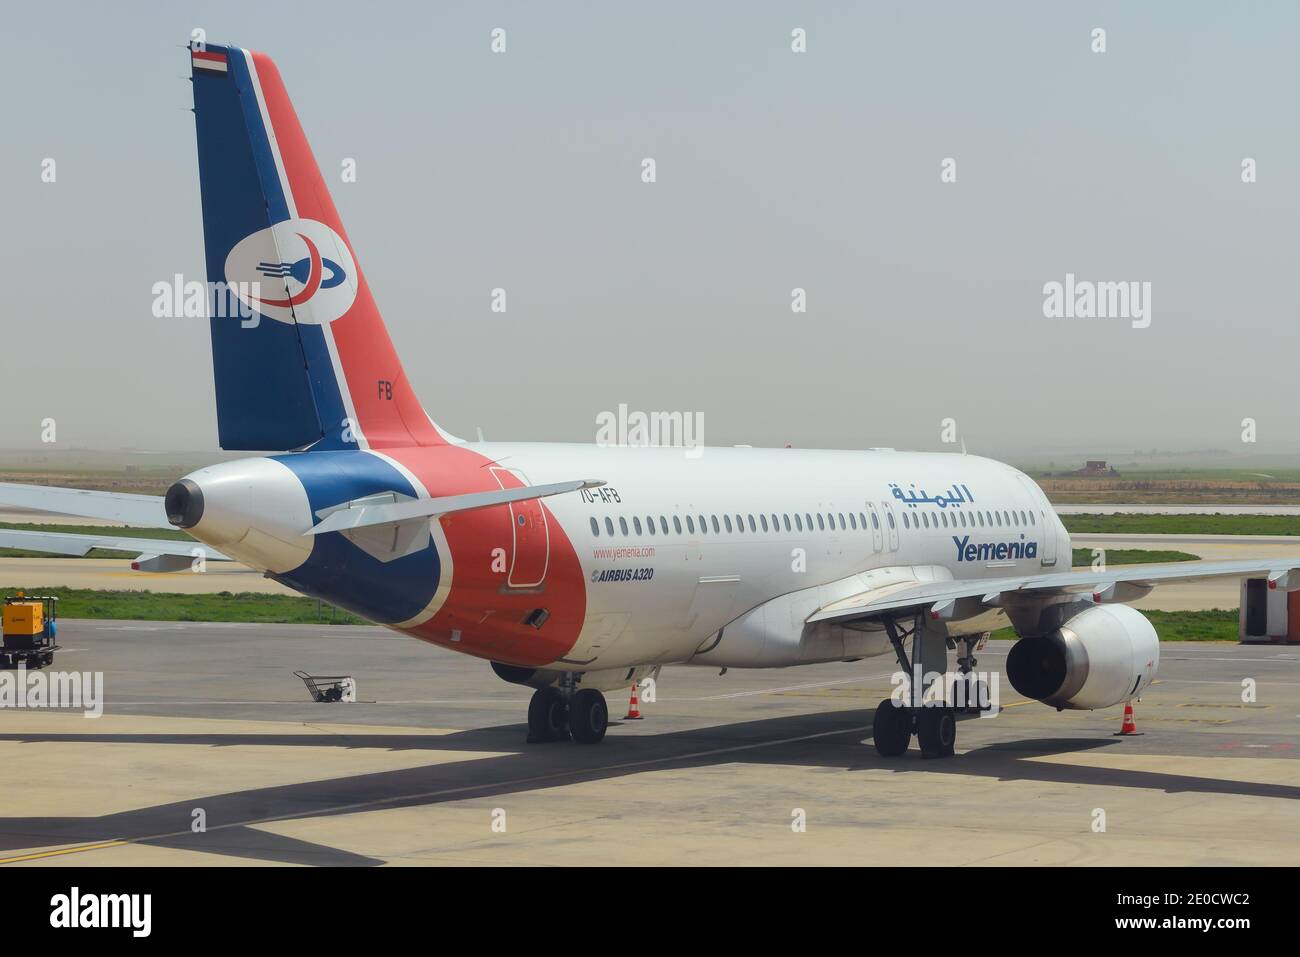 Yemenia Airlines Airbus A320. Yemen Airways airline, based in Sana'a and Aden Airport. Airline with a tumultuous recent history due to conflicts. Stock Photo